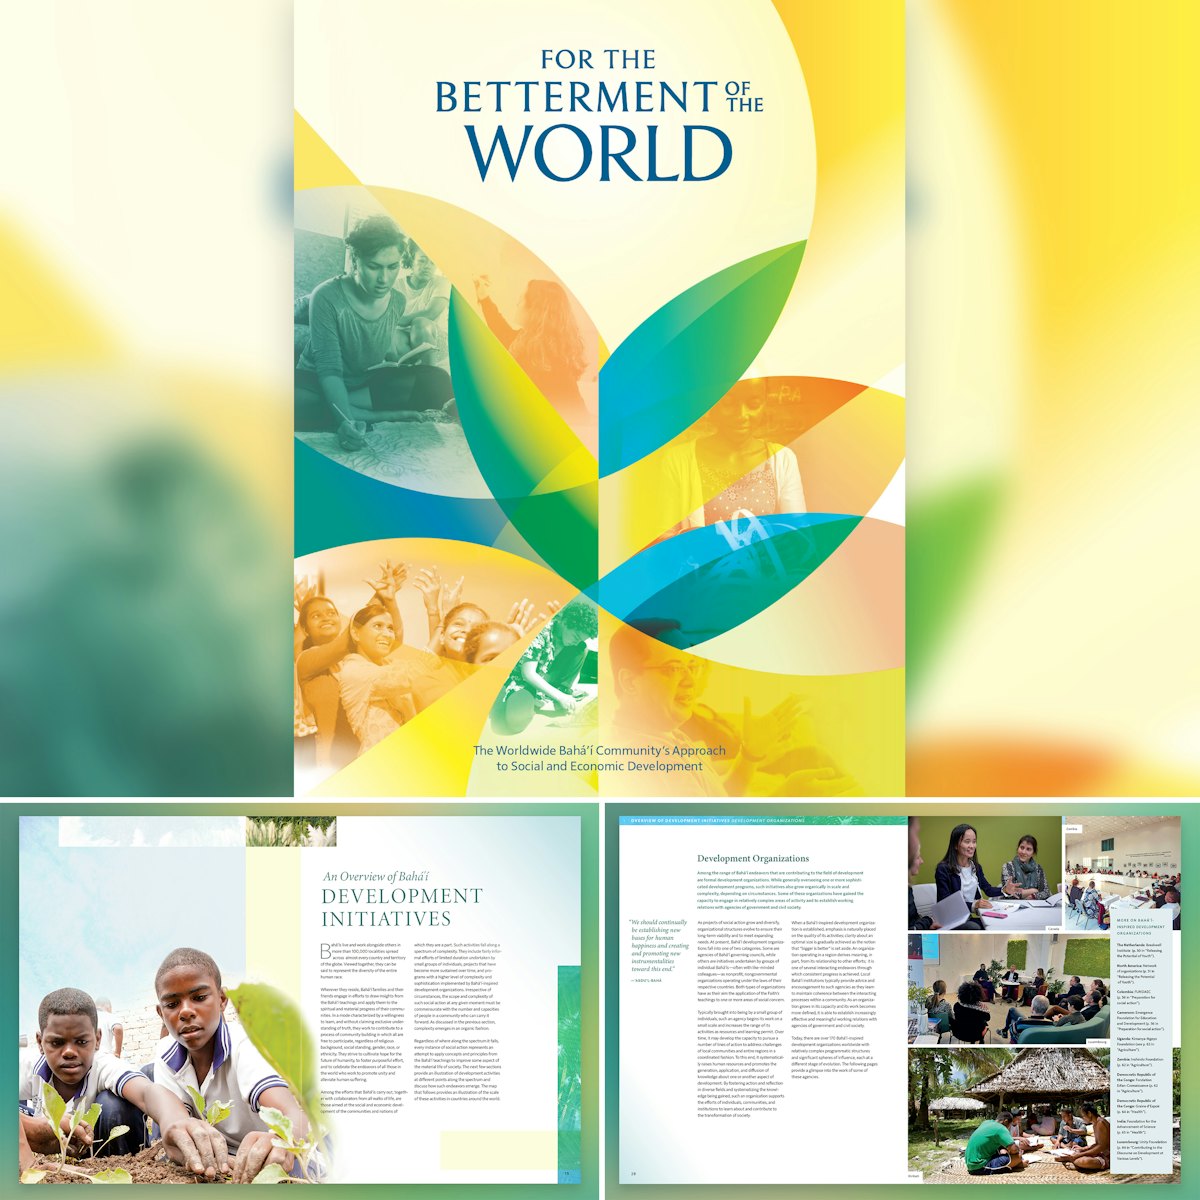 A new edition of the publication titled For the Betterment of the World was released, casting light on the efforts of the Bahá’í community to contribute to material and social progress.